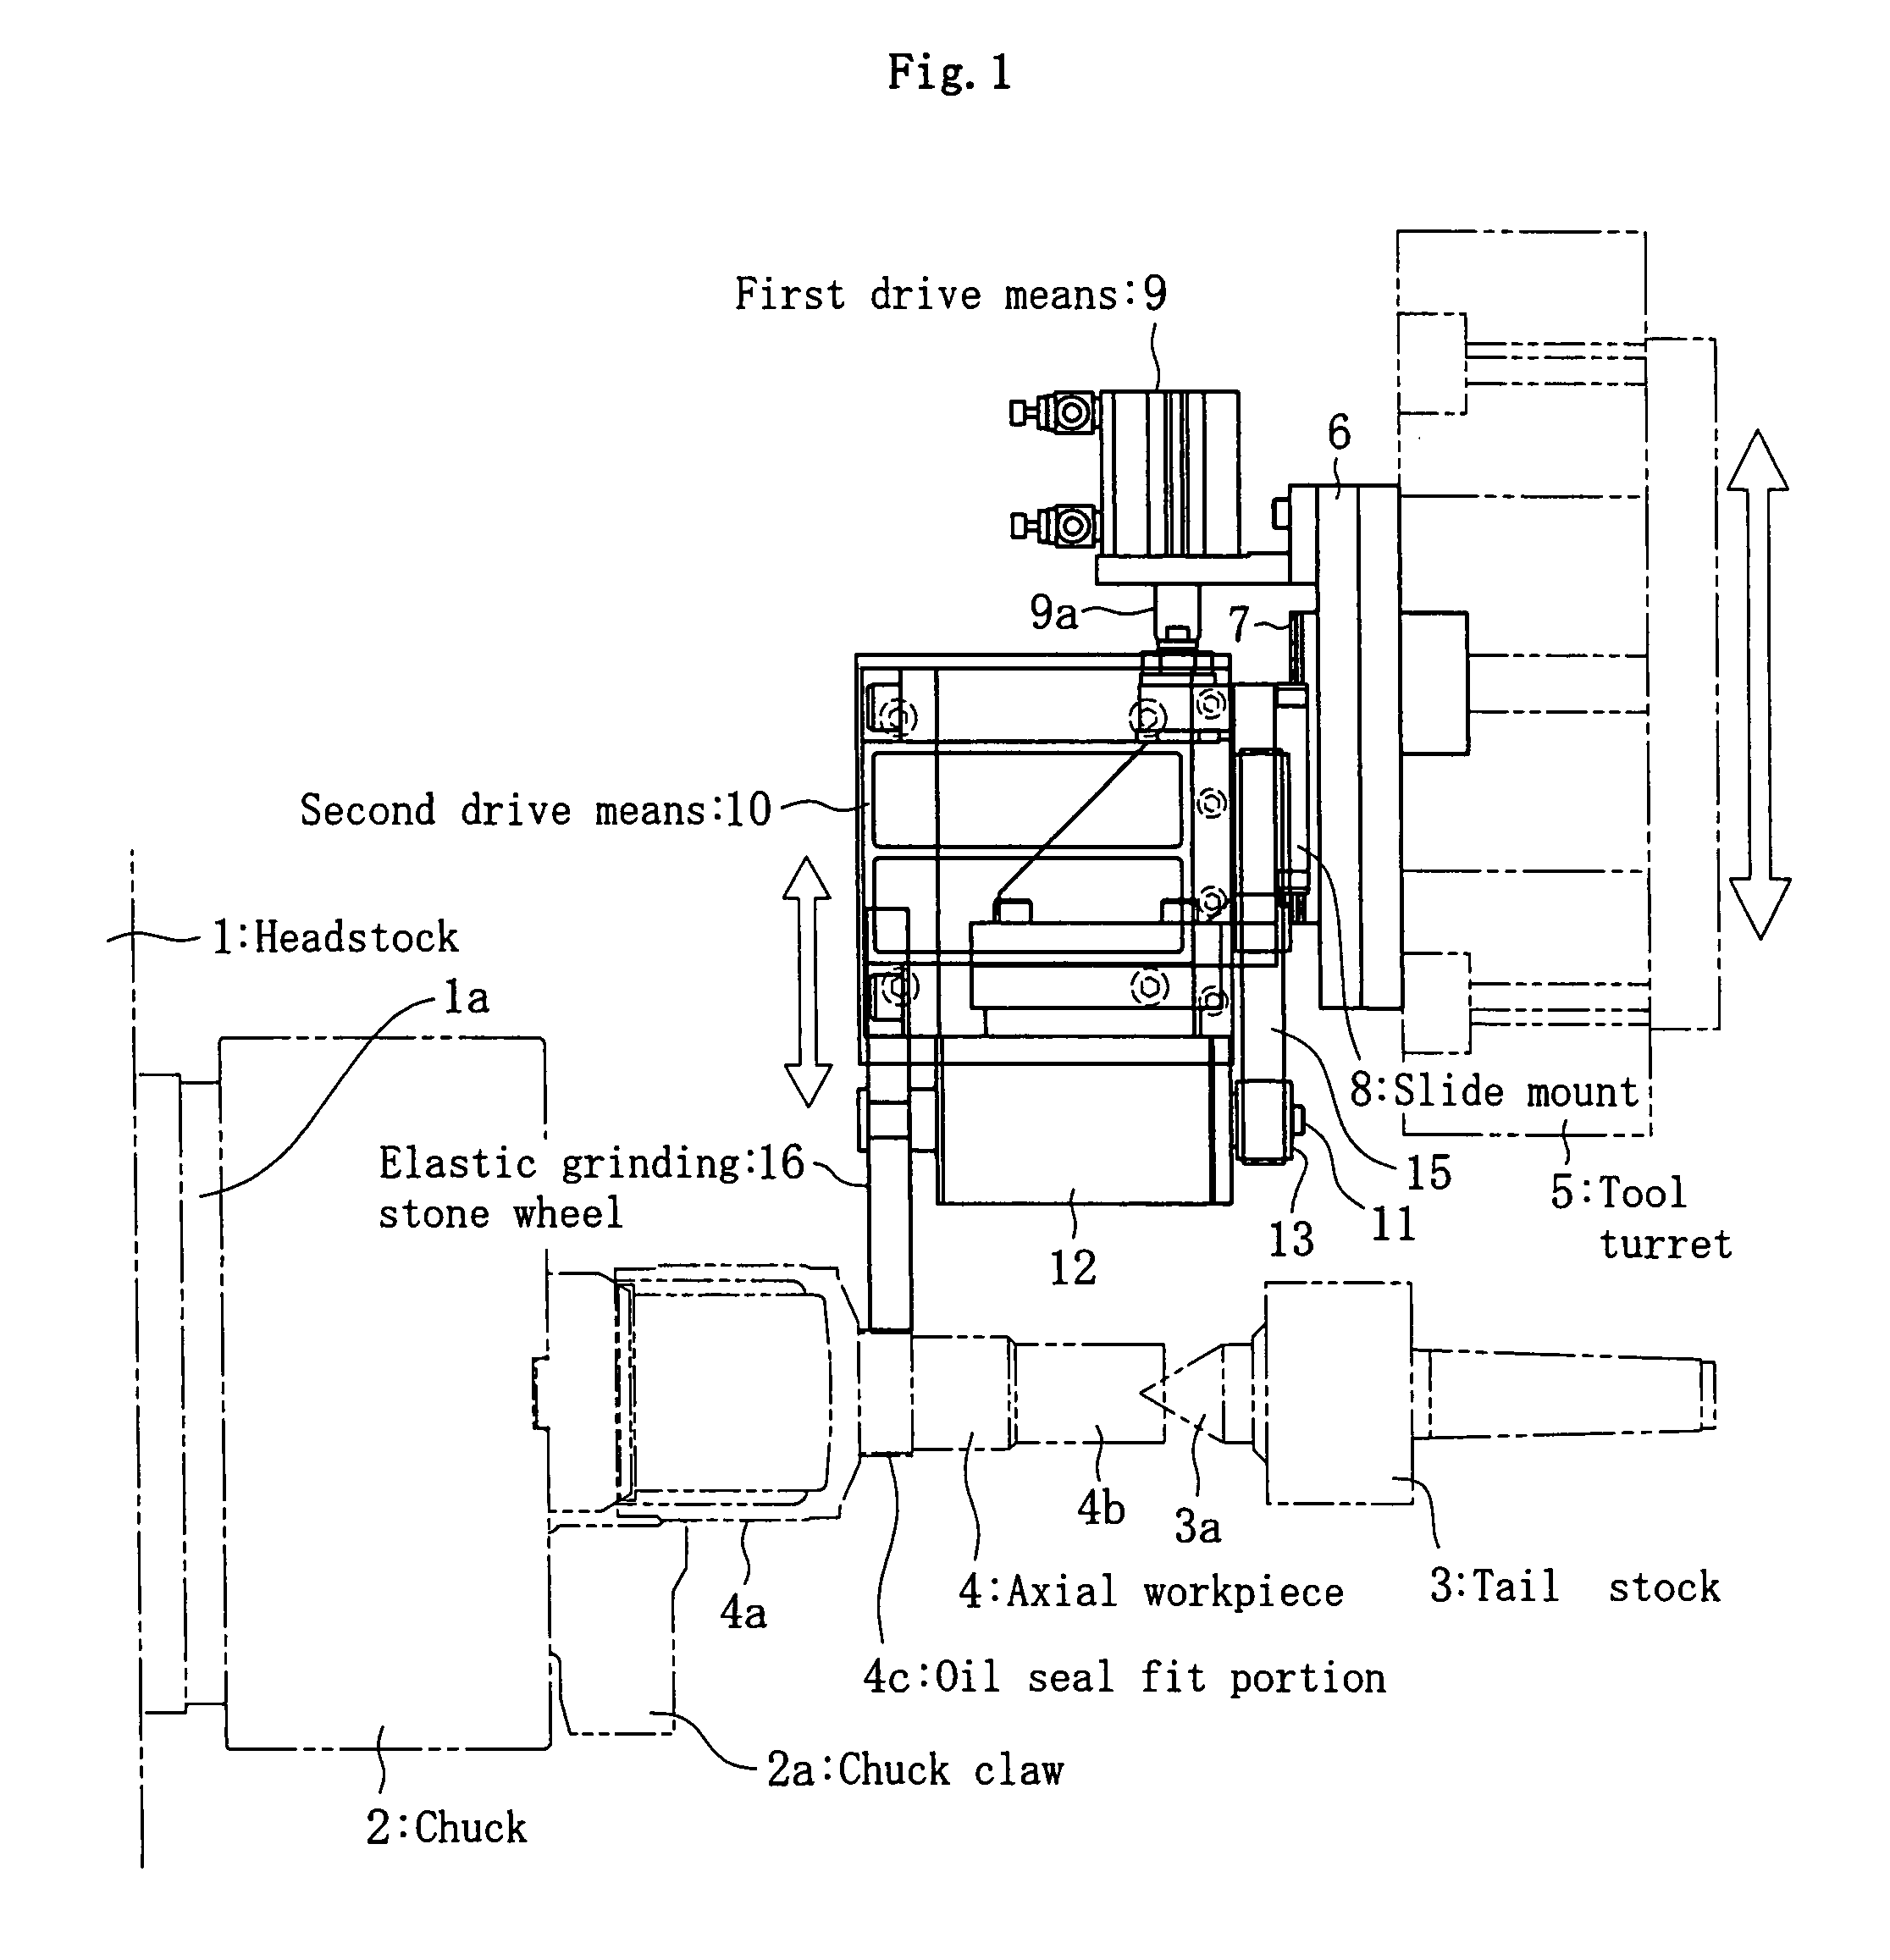 Method and apparatus for grinding axial workpieces